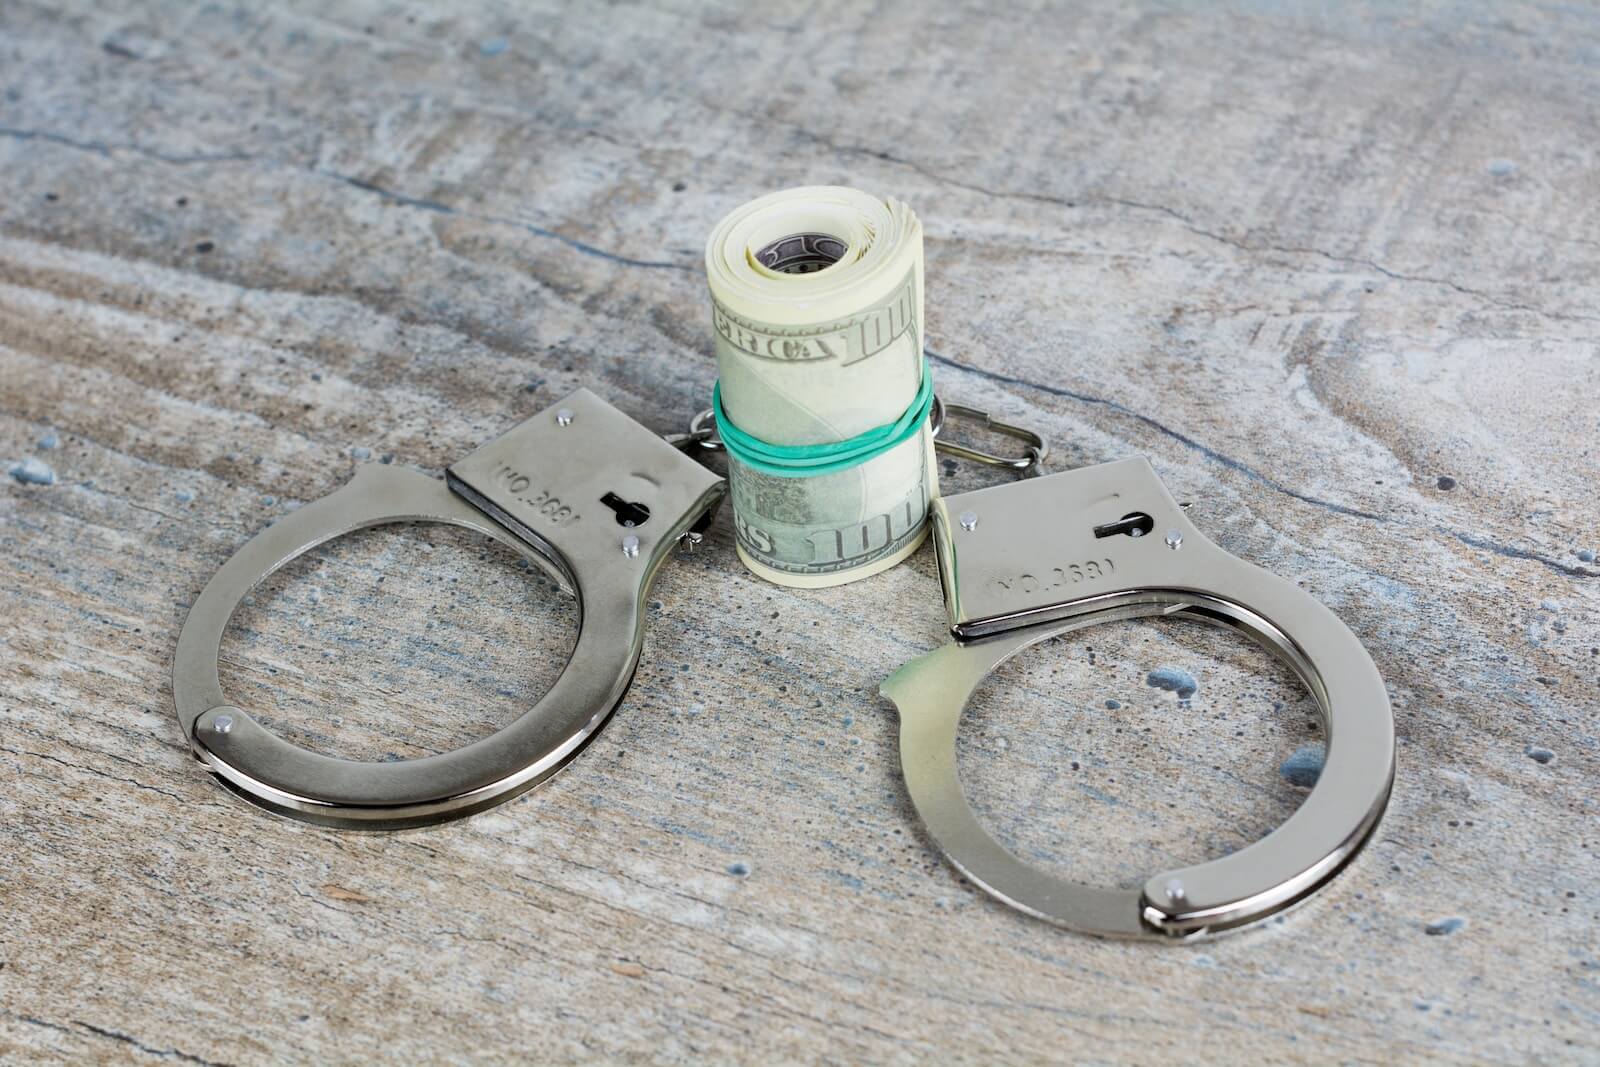 a pair of handcuffs and a roll of money on a table